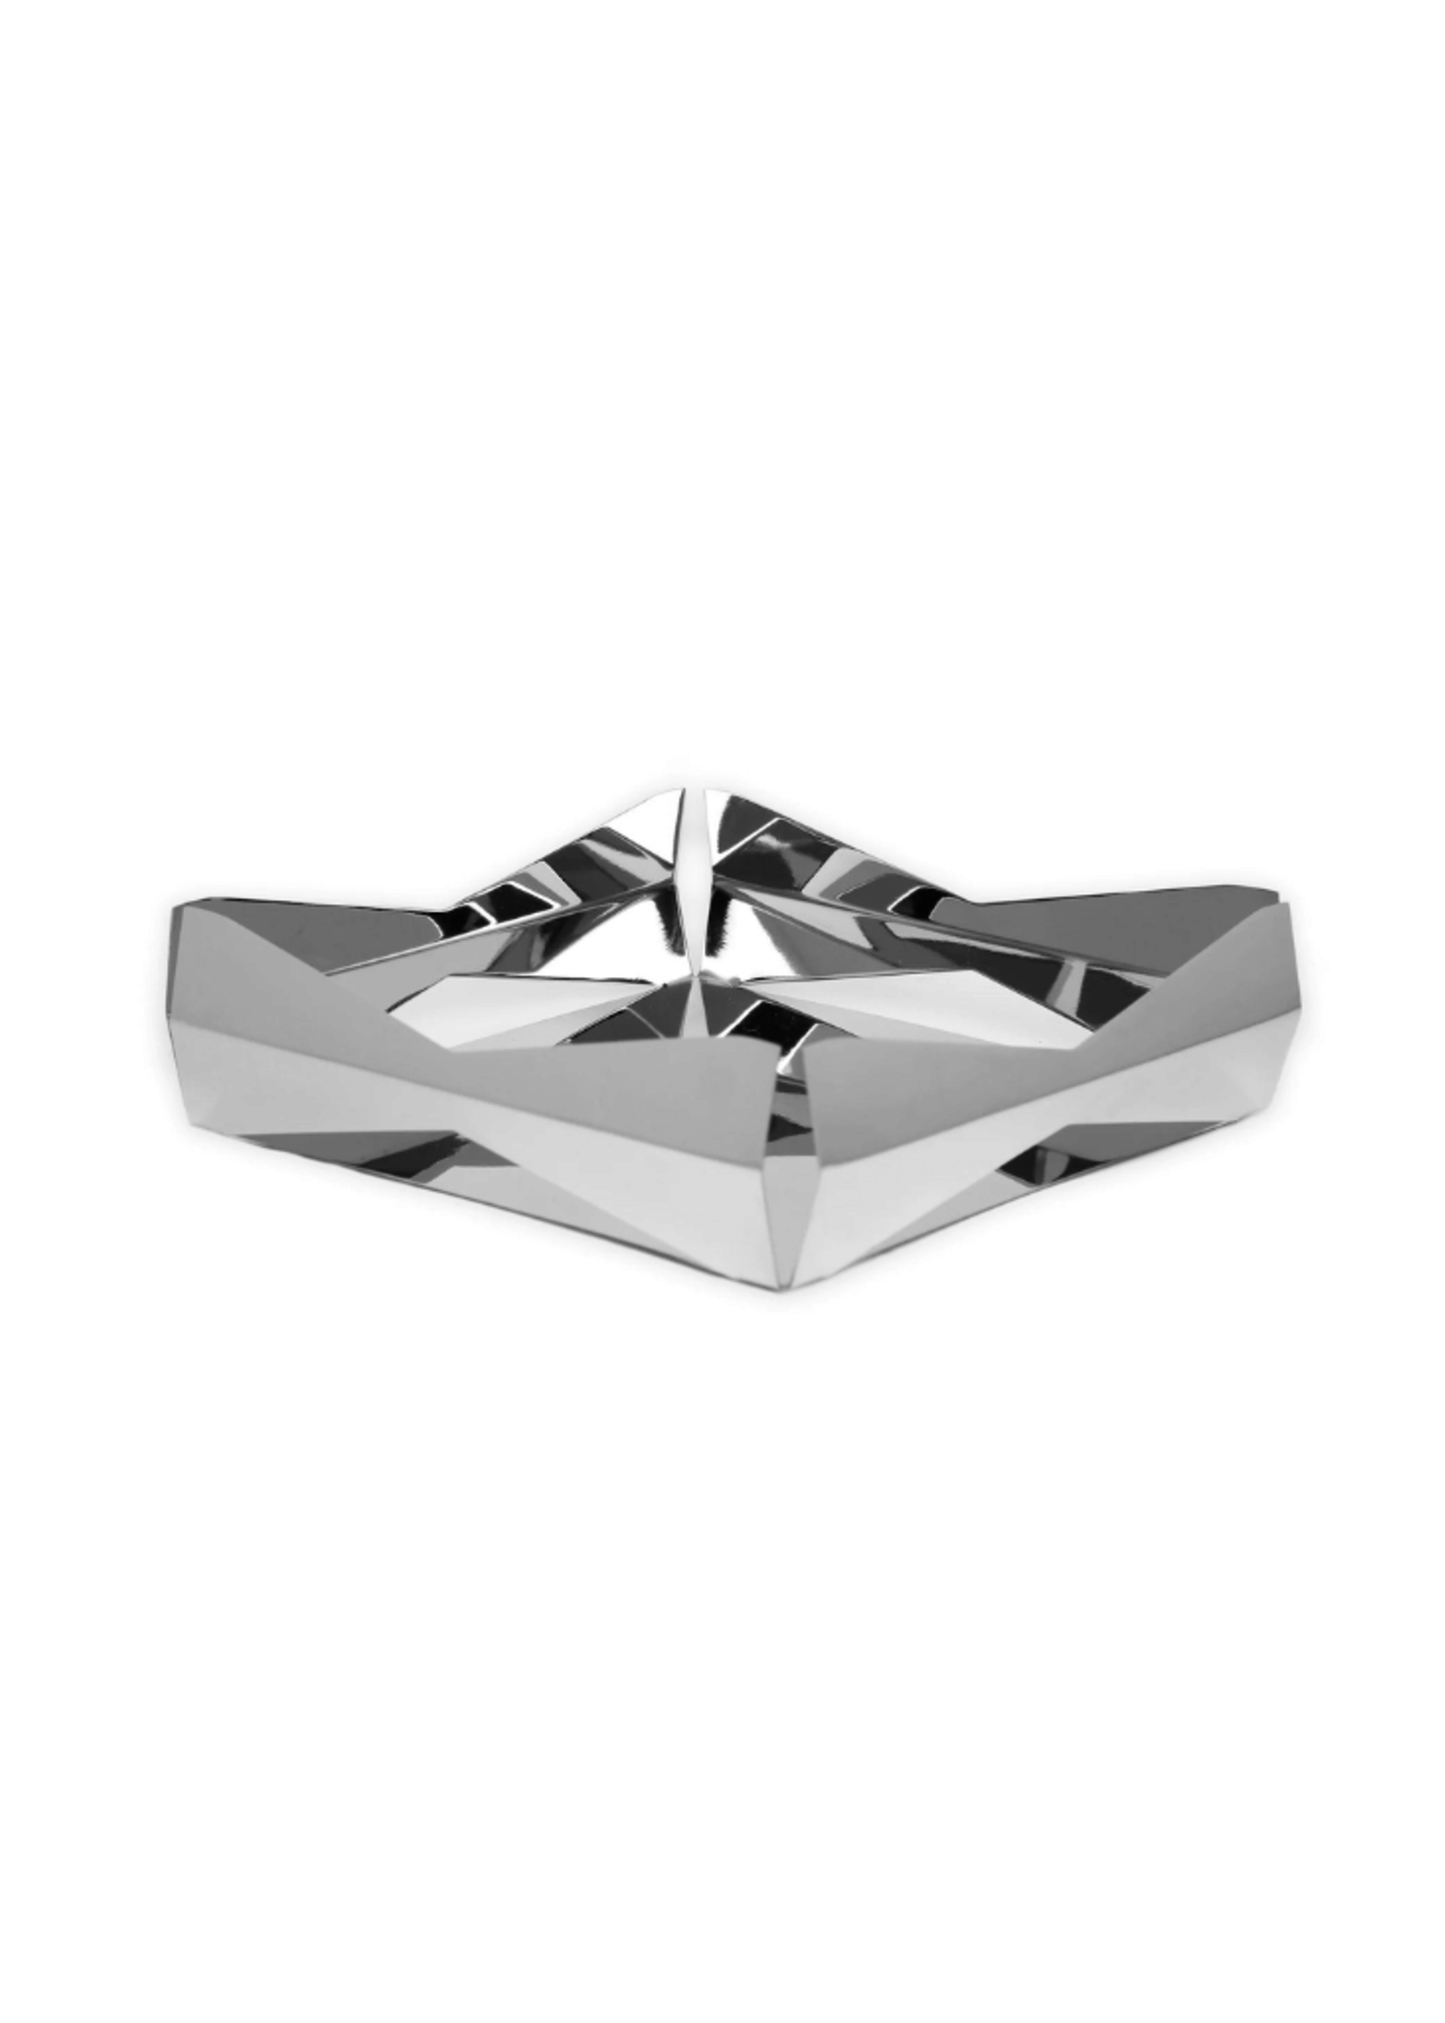 Stainless Steel Square "V" Tray